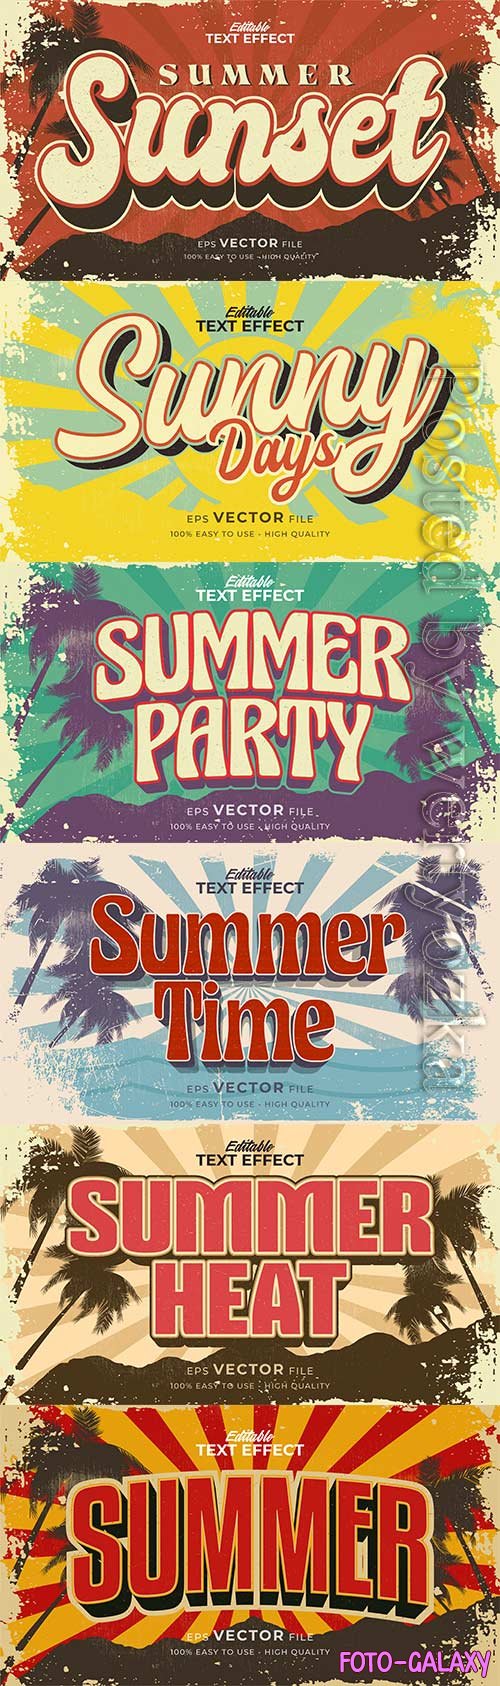 Retro summer holiday text in grunge style theme in vector vol 5